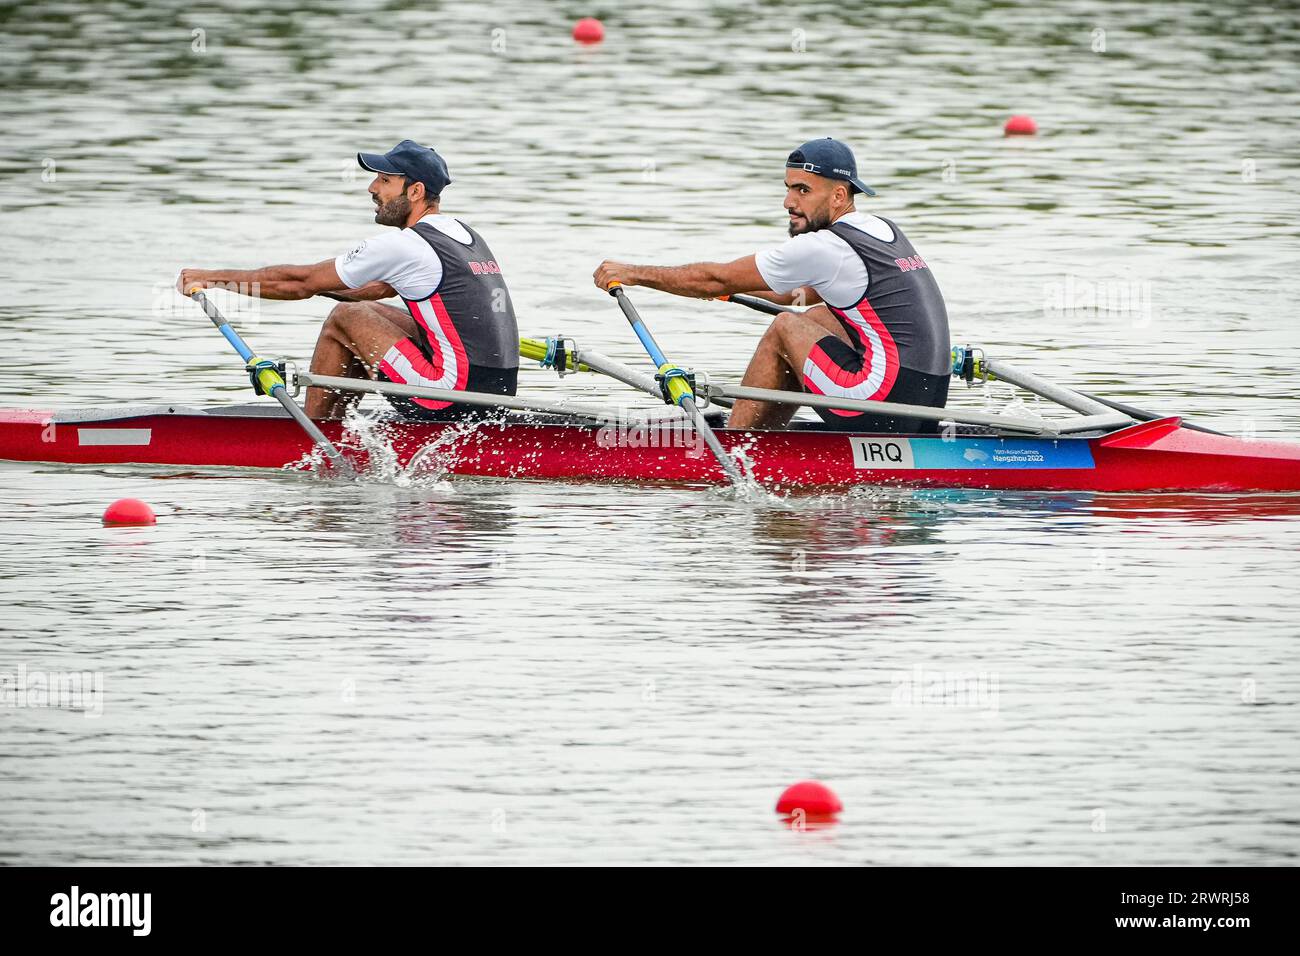 Hangzhou, China's Zhejiang Province. 21st Sep, 2023. Baker Shihab Ahmed Al-Dulaimi (R) and Mohammed Riyadh Jasim Al-Khafaji of Iraq compete during the Men's Double Sculls Repechage of rowing at the 19th Asian Games in Hangzhou, east China's Zhejiang Province, Sept. 21, 2023. Credit: Jiang Han/Xinhua/Alamy Live News Stock Photo